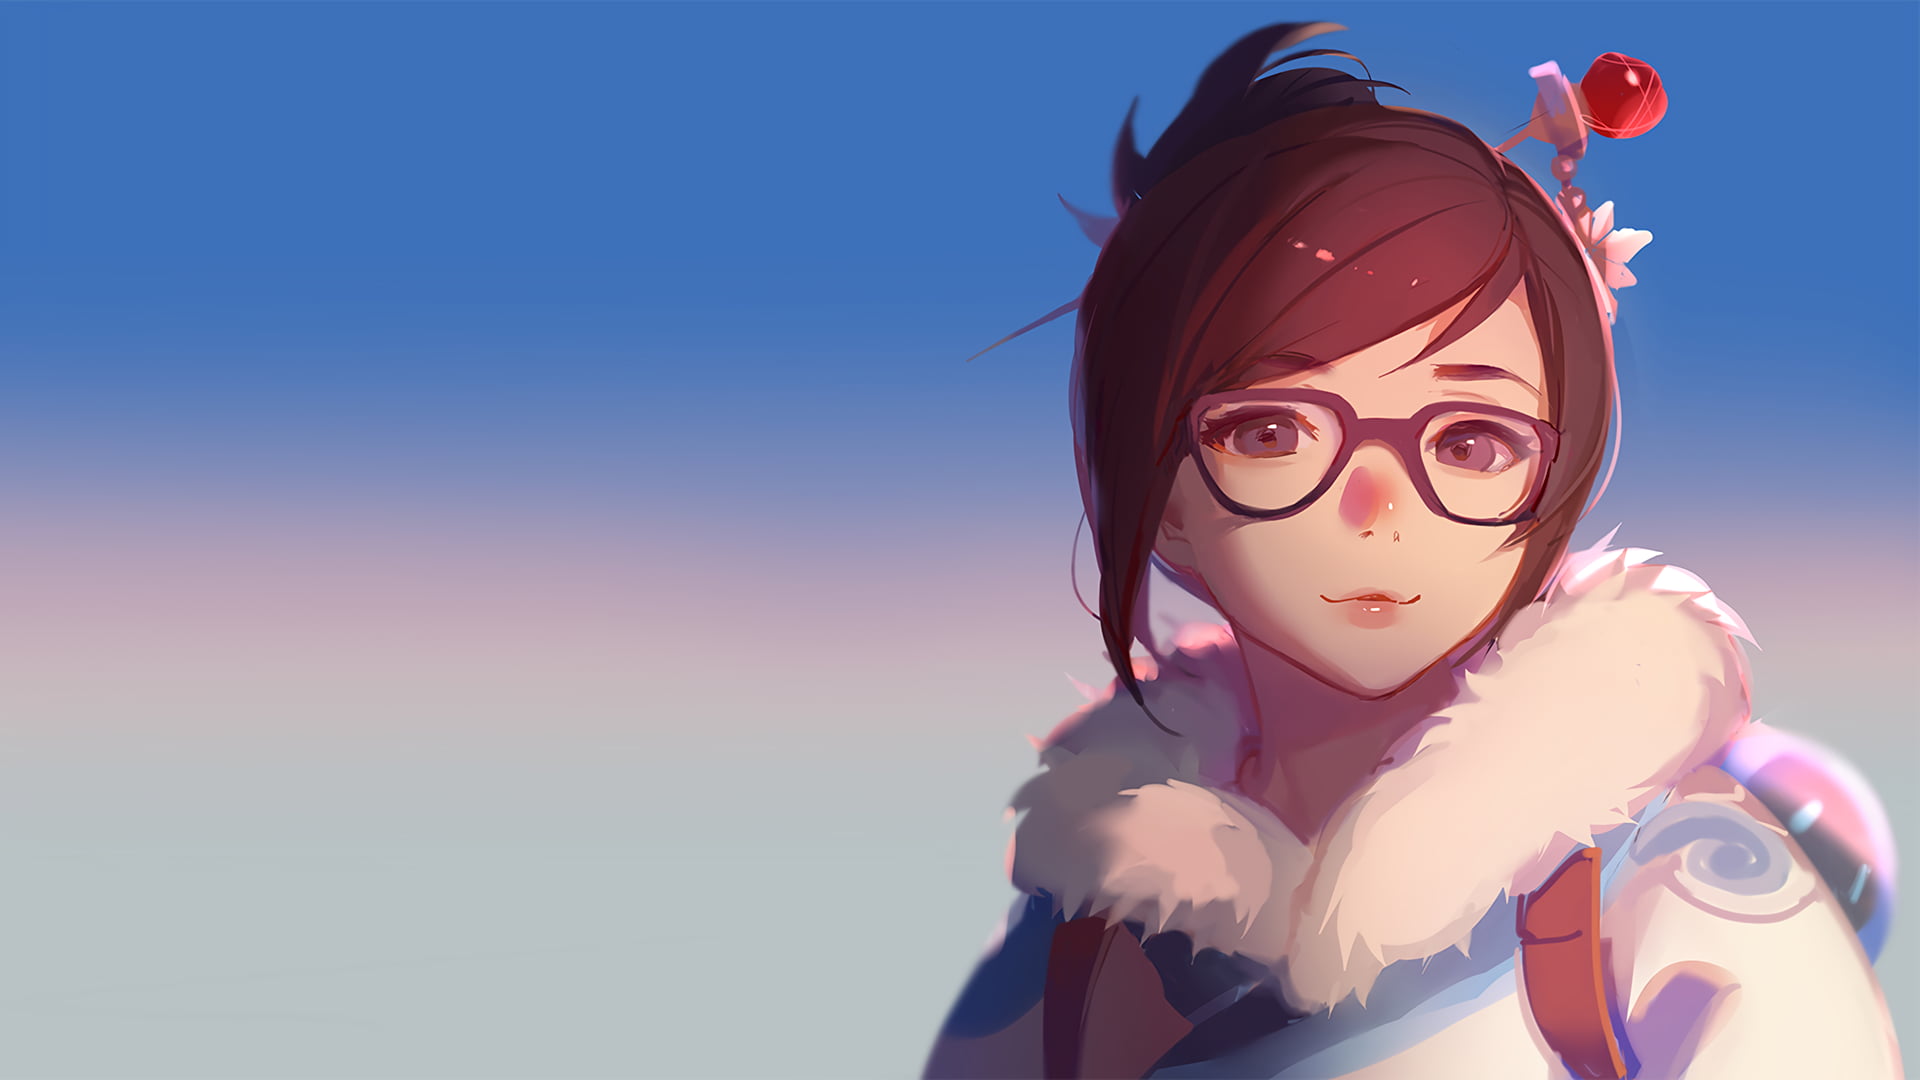 Brown hair and gray eyes anime character illustration, Overwatch, video ...